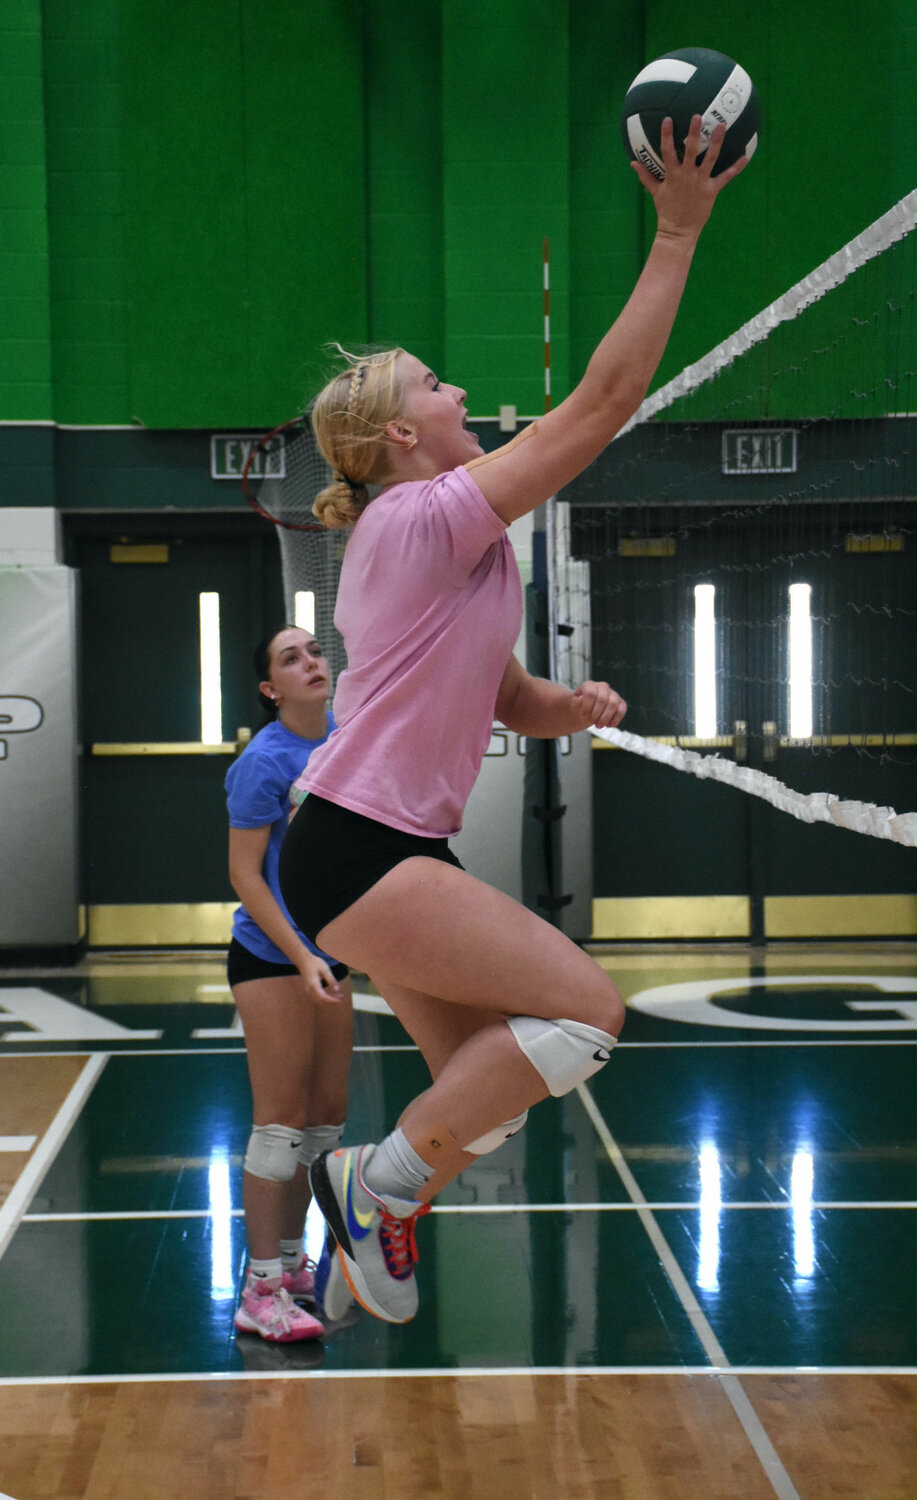 Robert Galbreath photo
PHS senior Trista Covill catches air at volleyball practice on Aug. 29. Covill and her teammates on the Lady Wranglers’ varsity team posted a 2-2 record at the Lander Invite on Aug. 25-26.